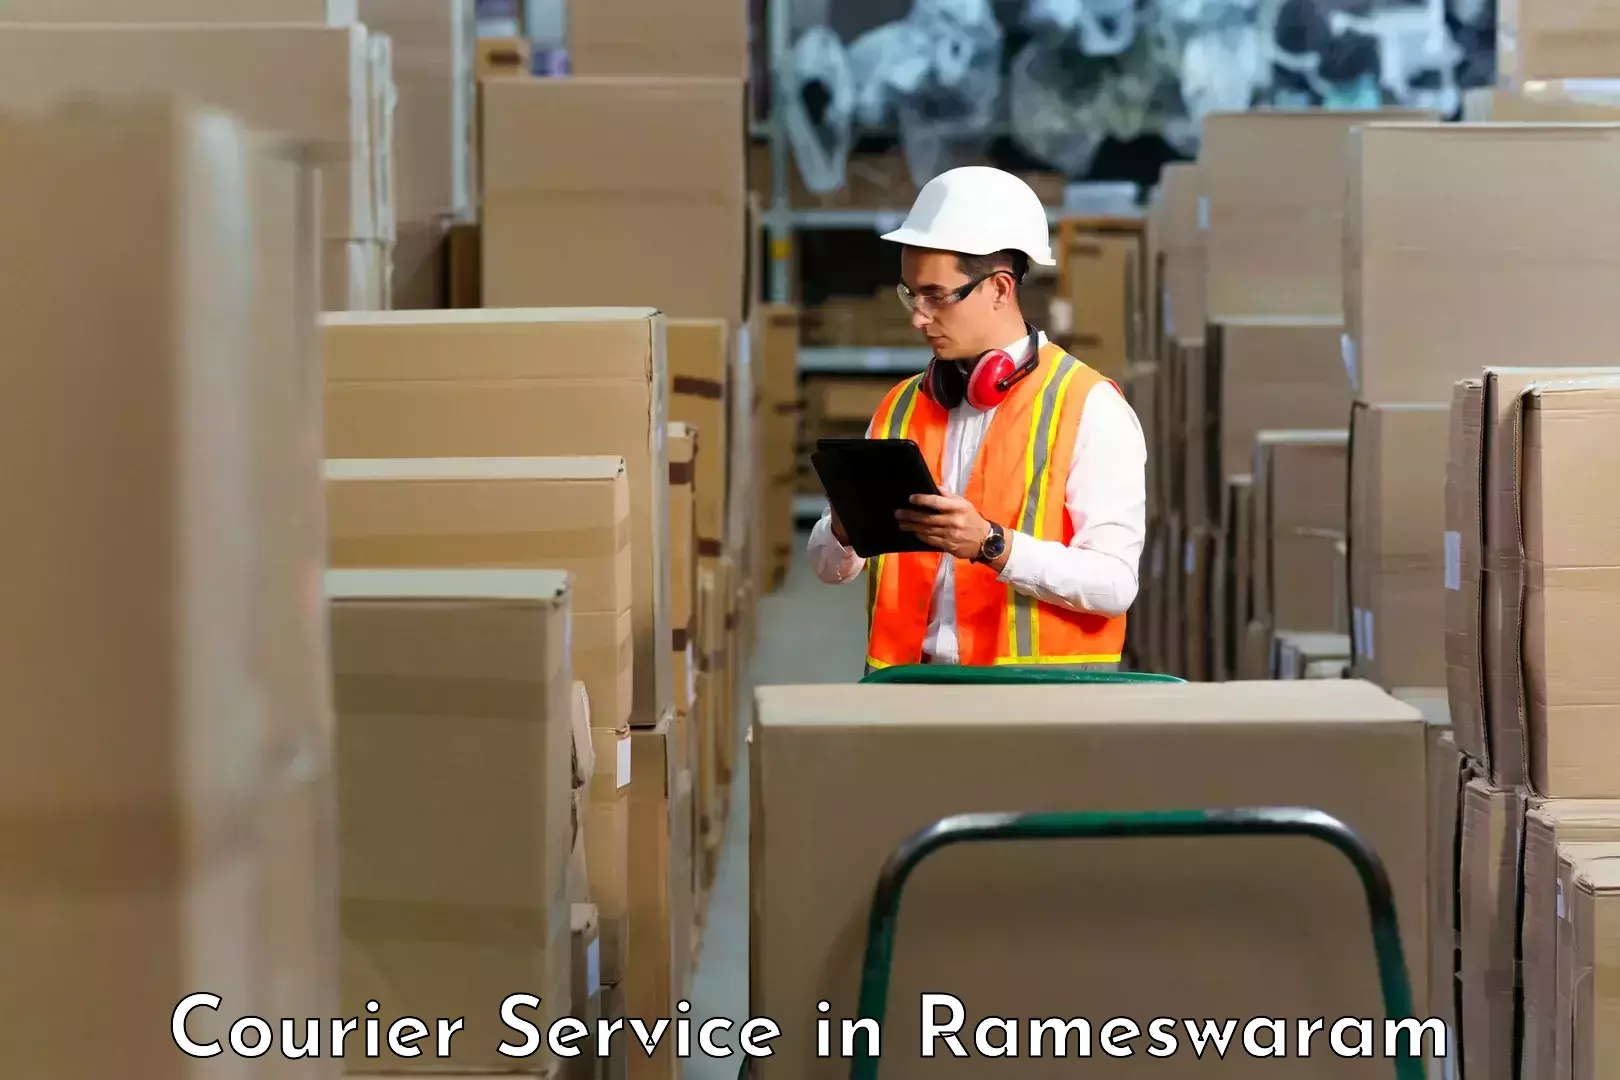 On-call courier service in Rameswaram